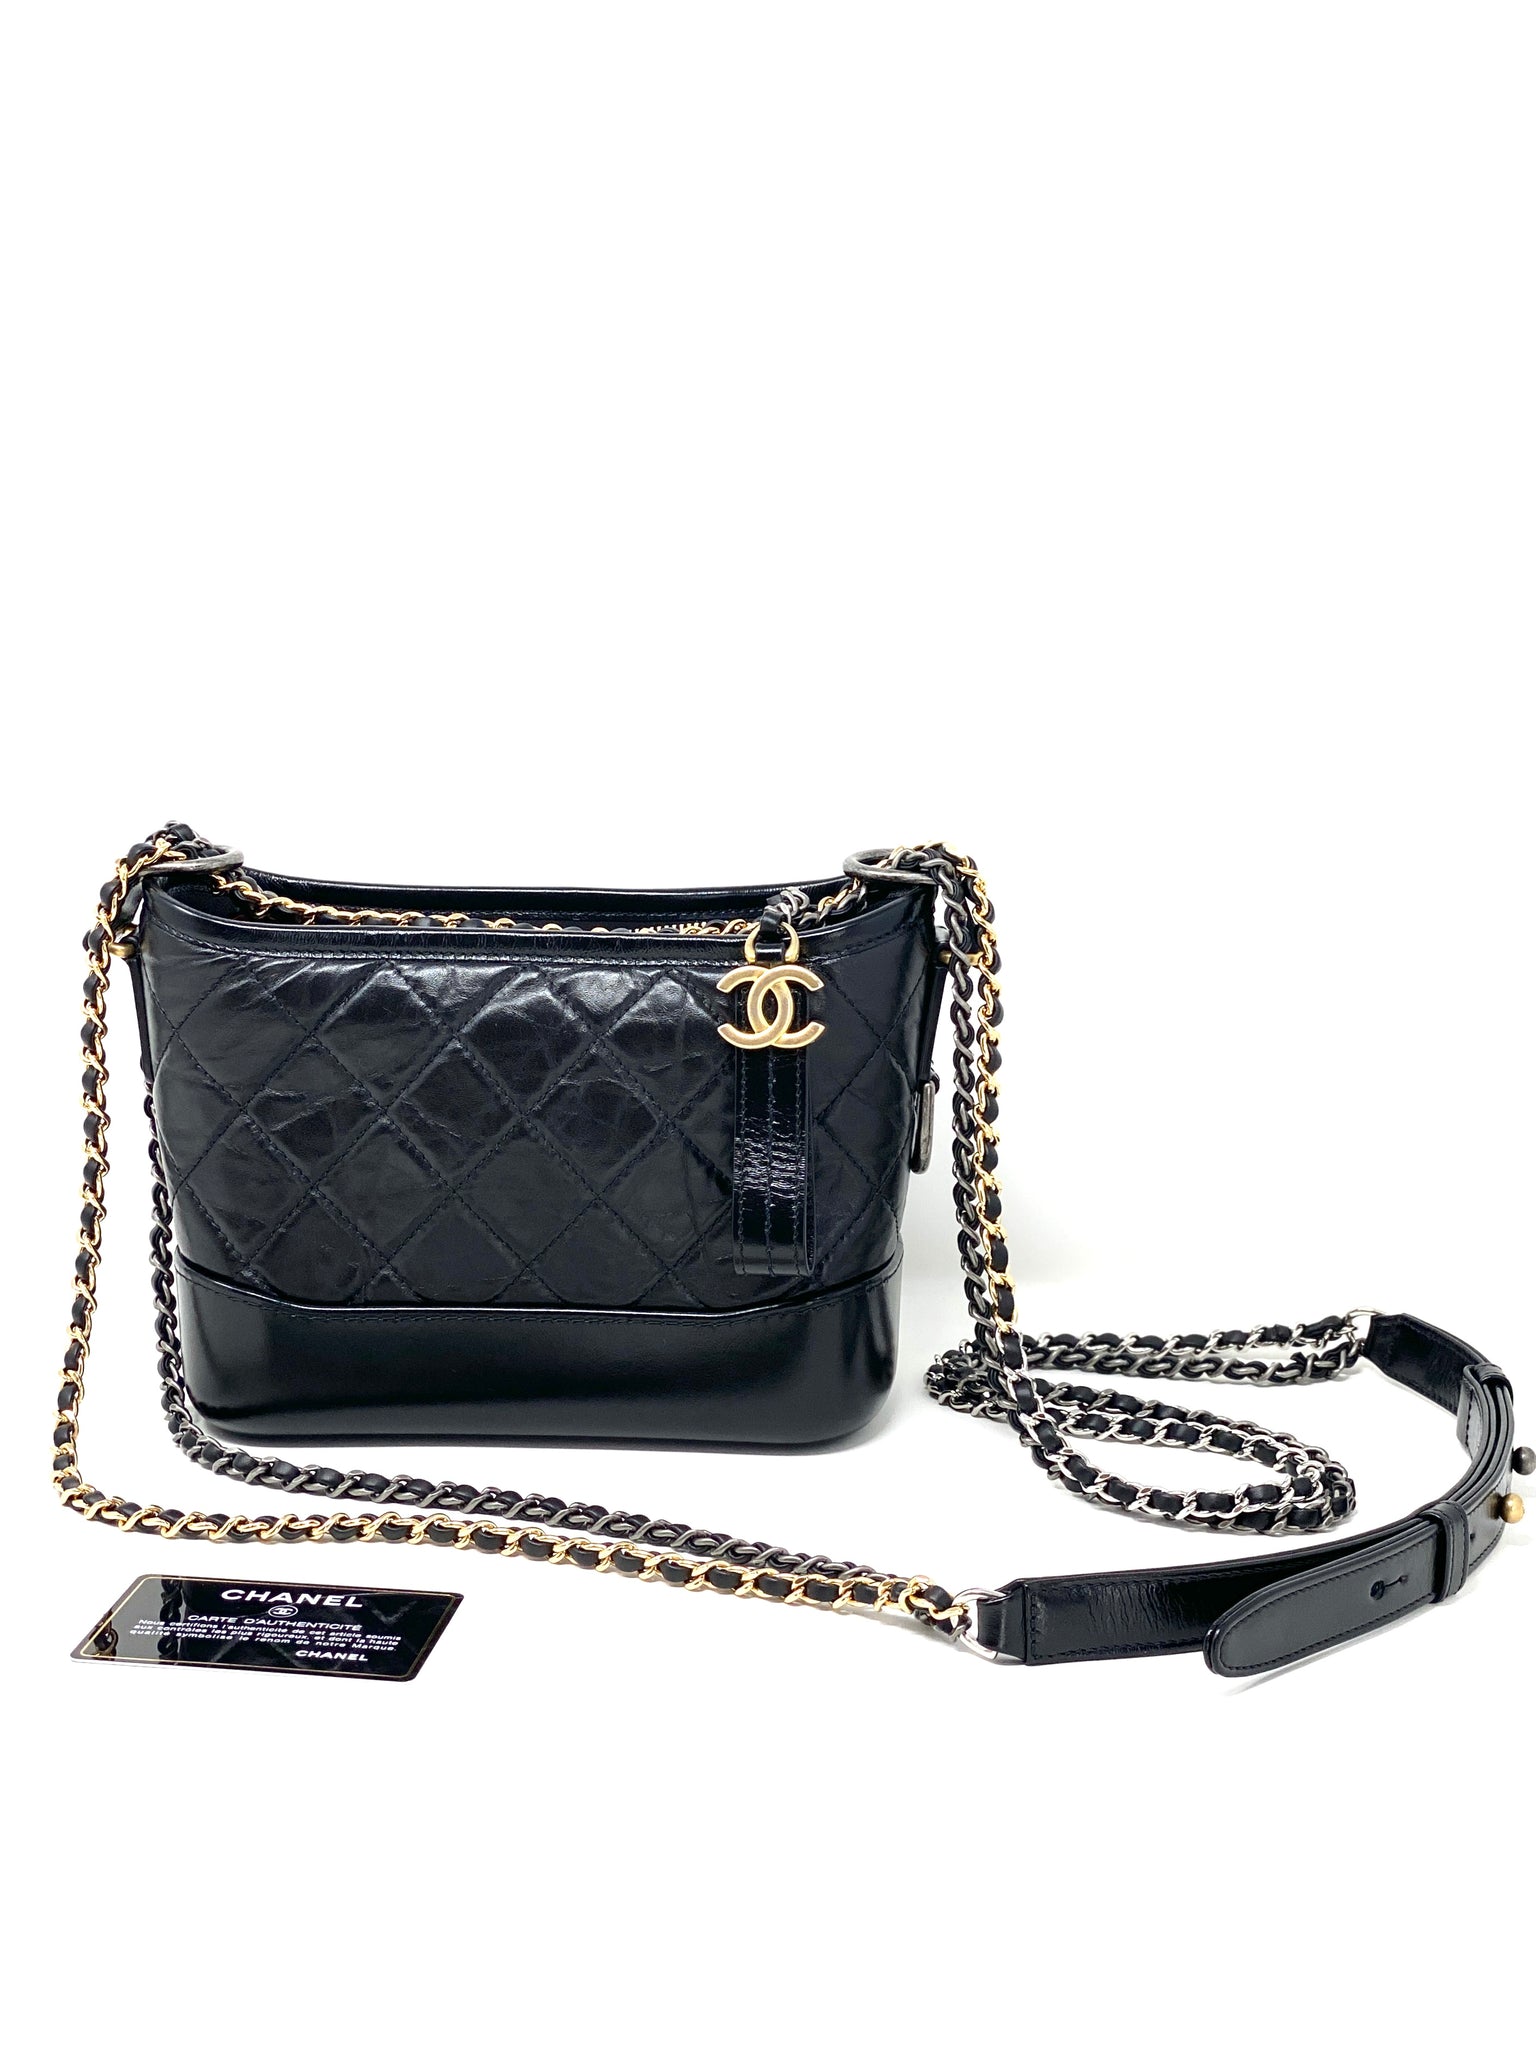 Buy Pre-owned & Brand new Luxury Chanel Gabrielle Small Hobo Bag